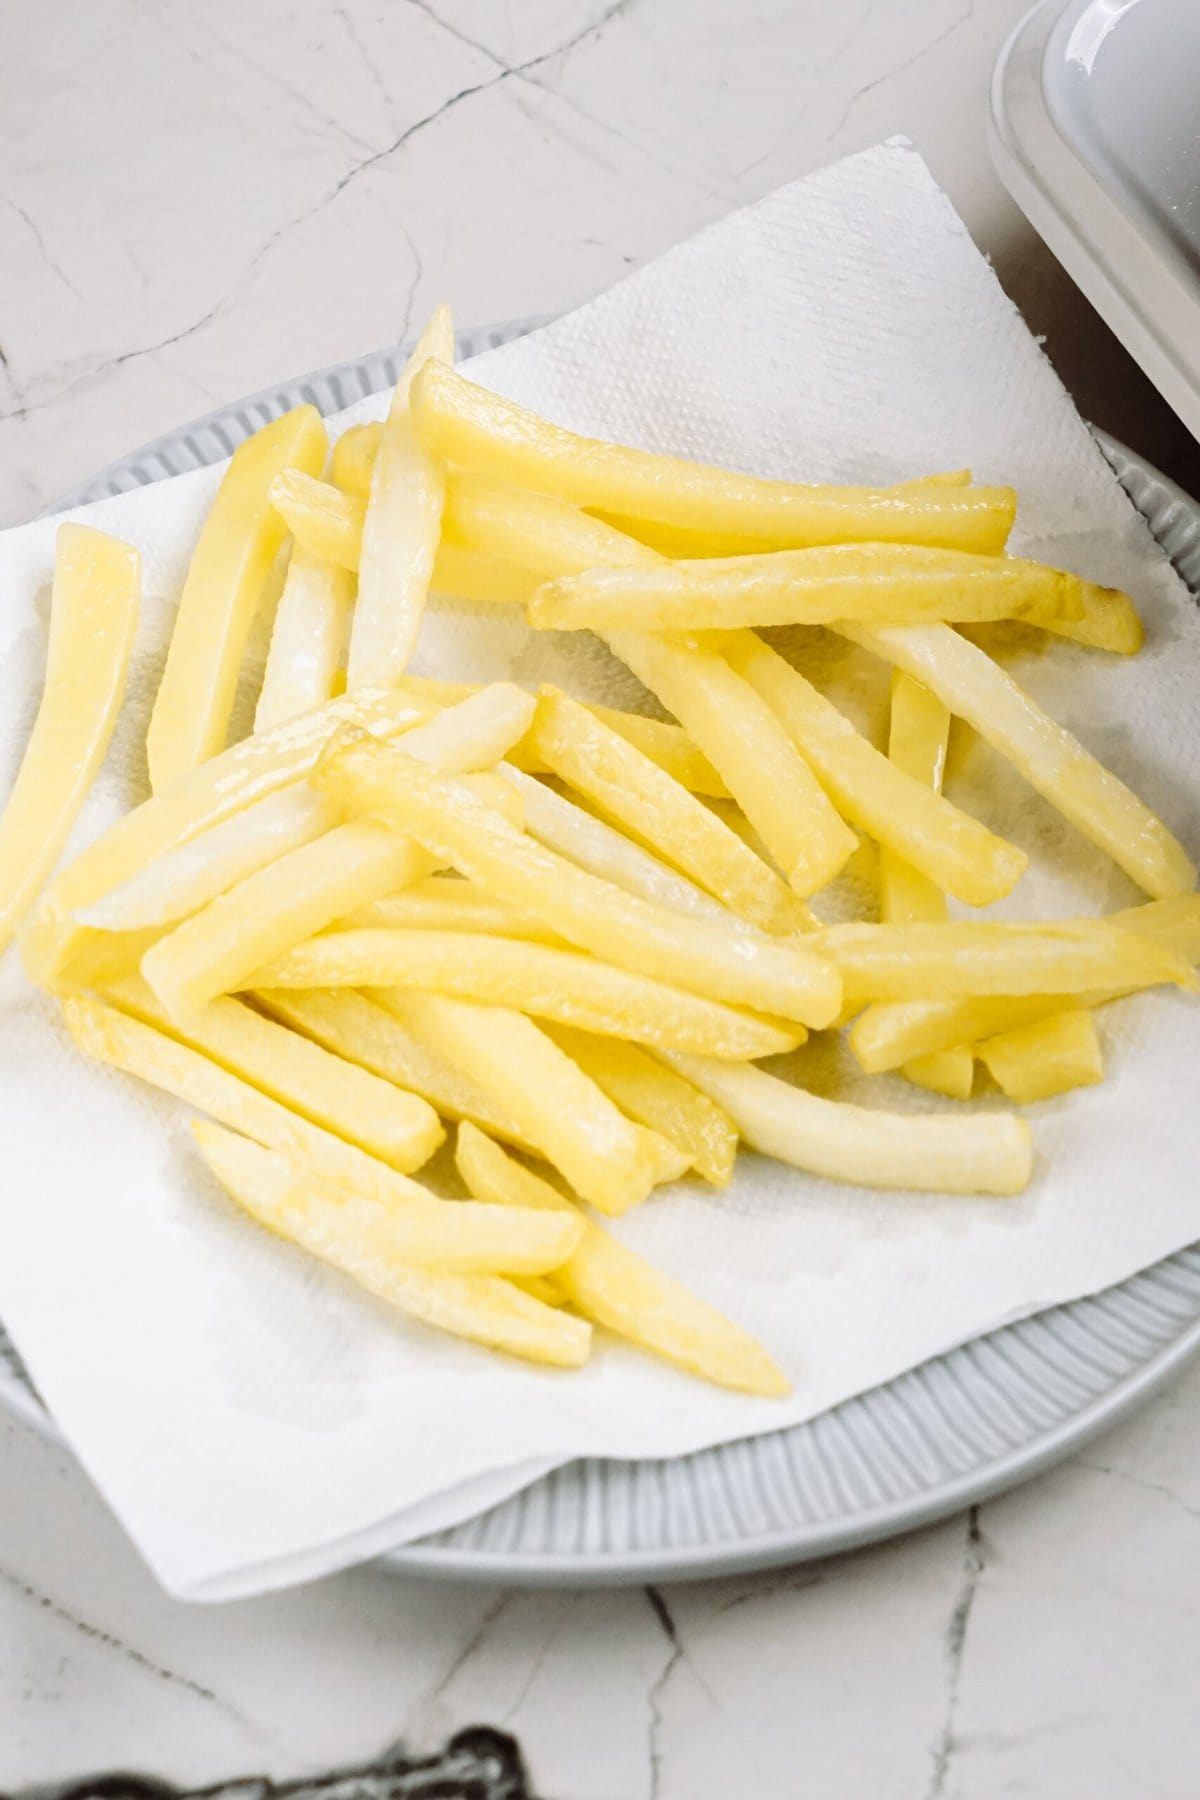 pomme frites draining on paper towels